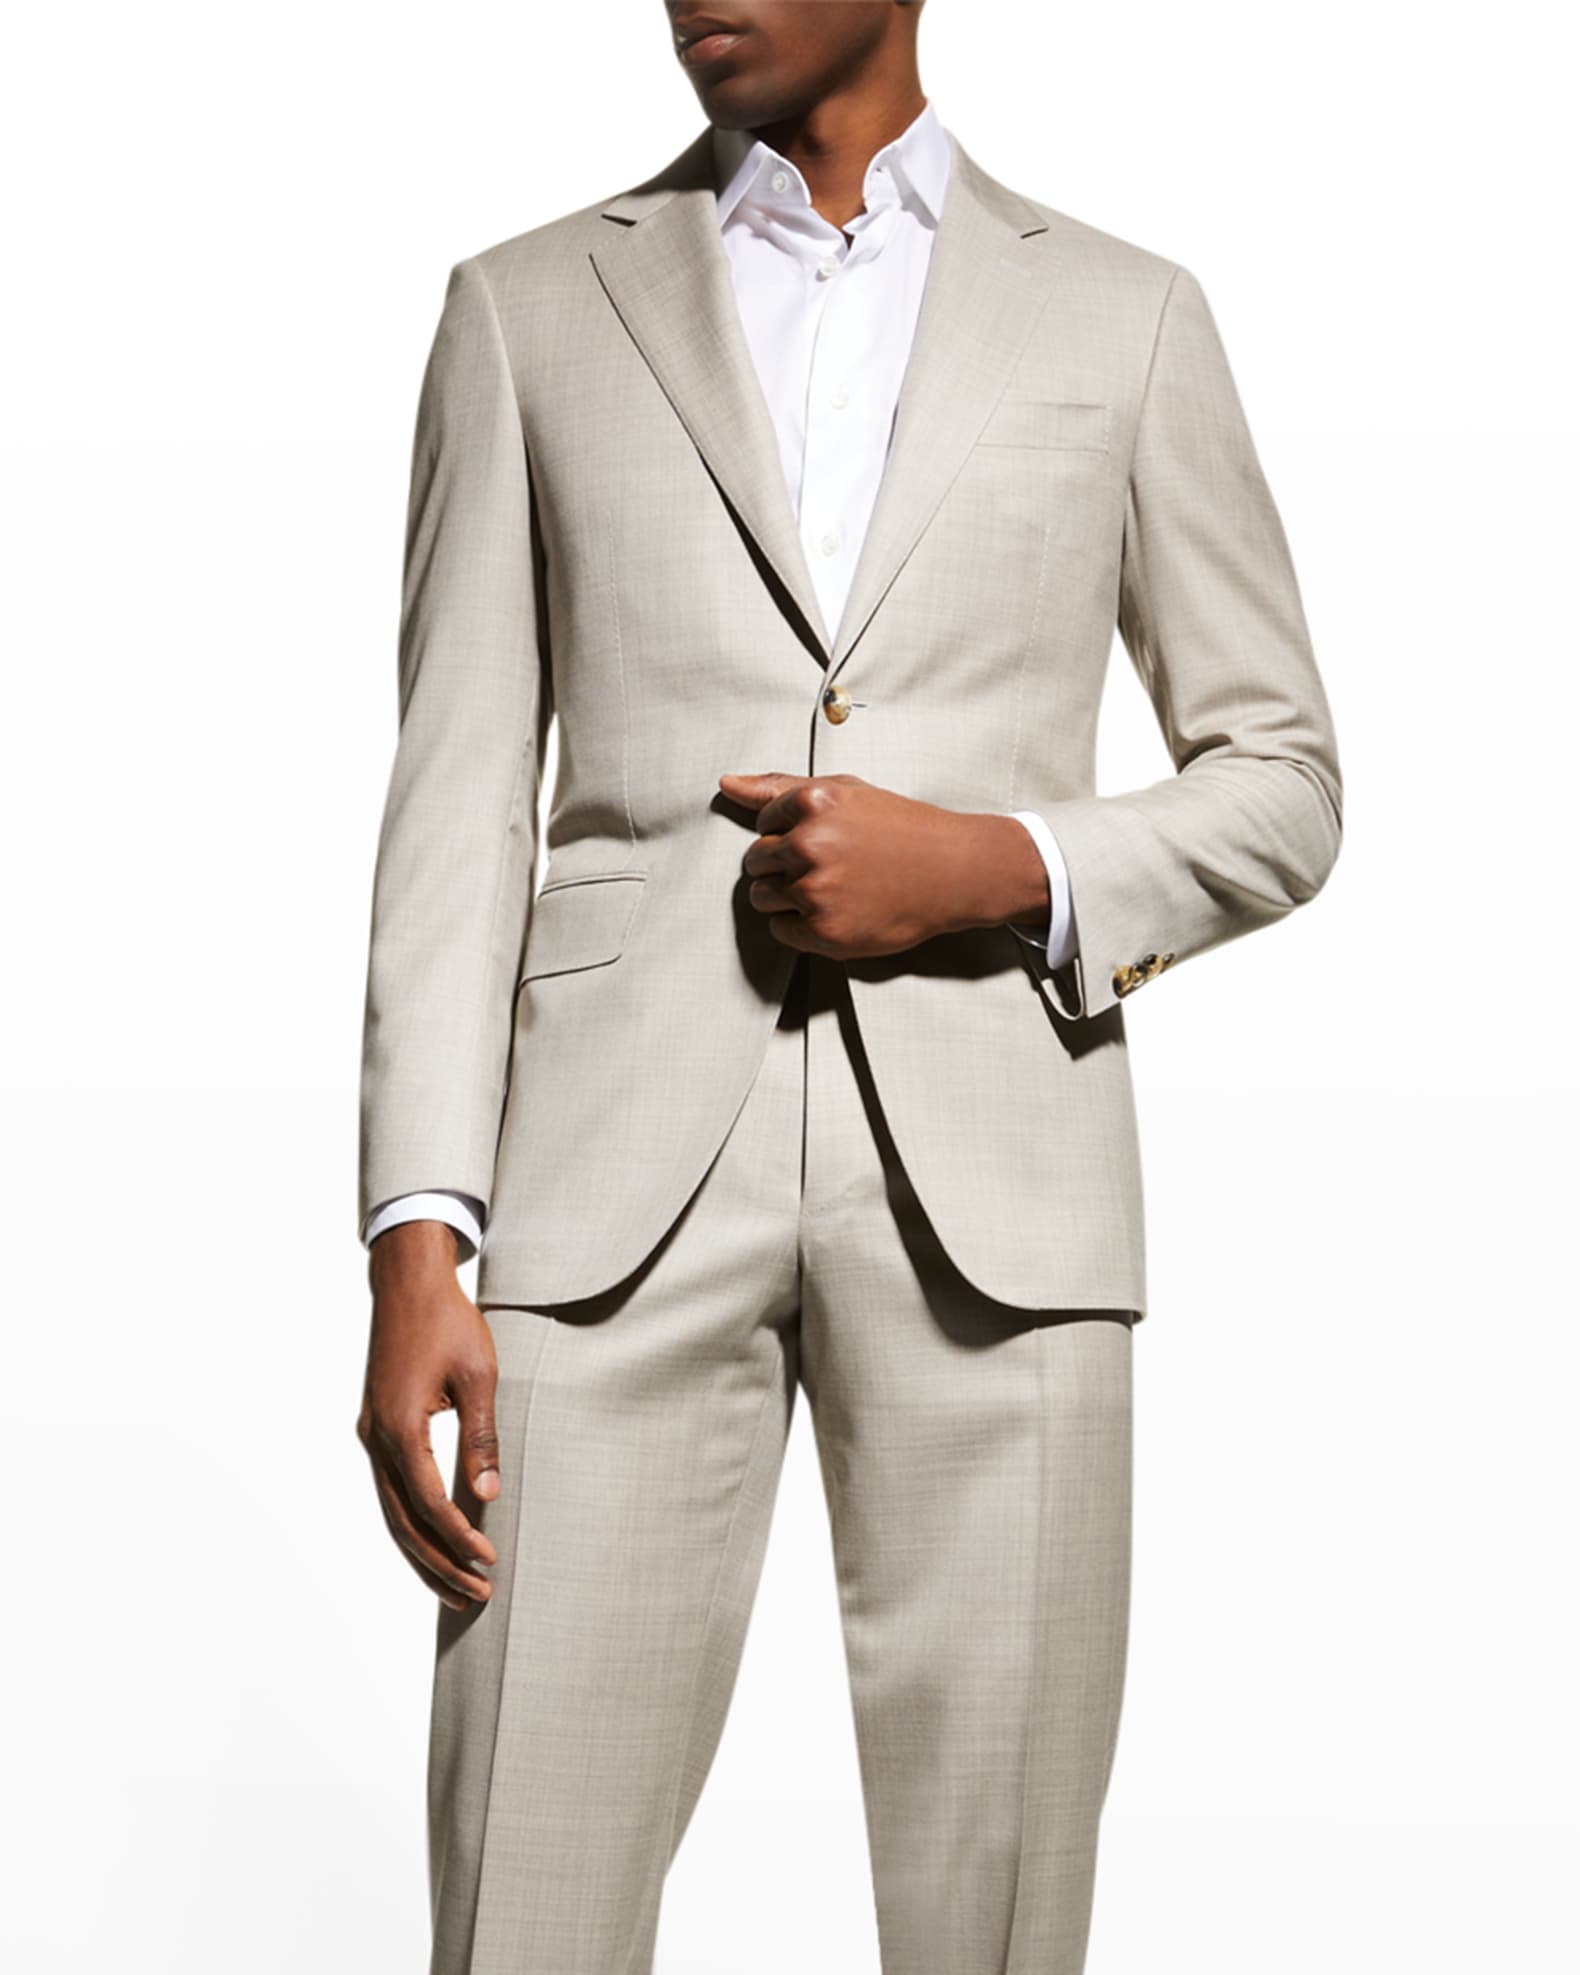 Canali Men's Heathered Solid Wool Suit | Neiman Marcus